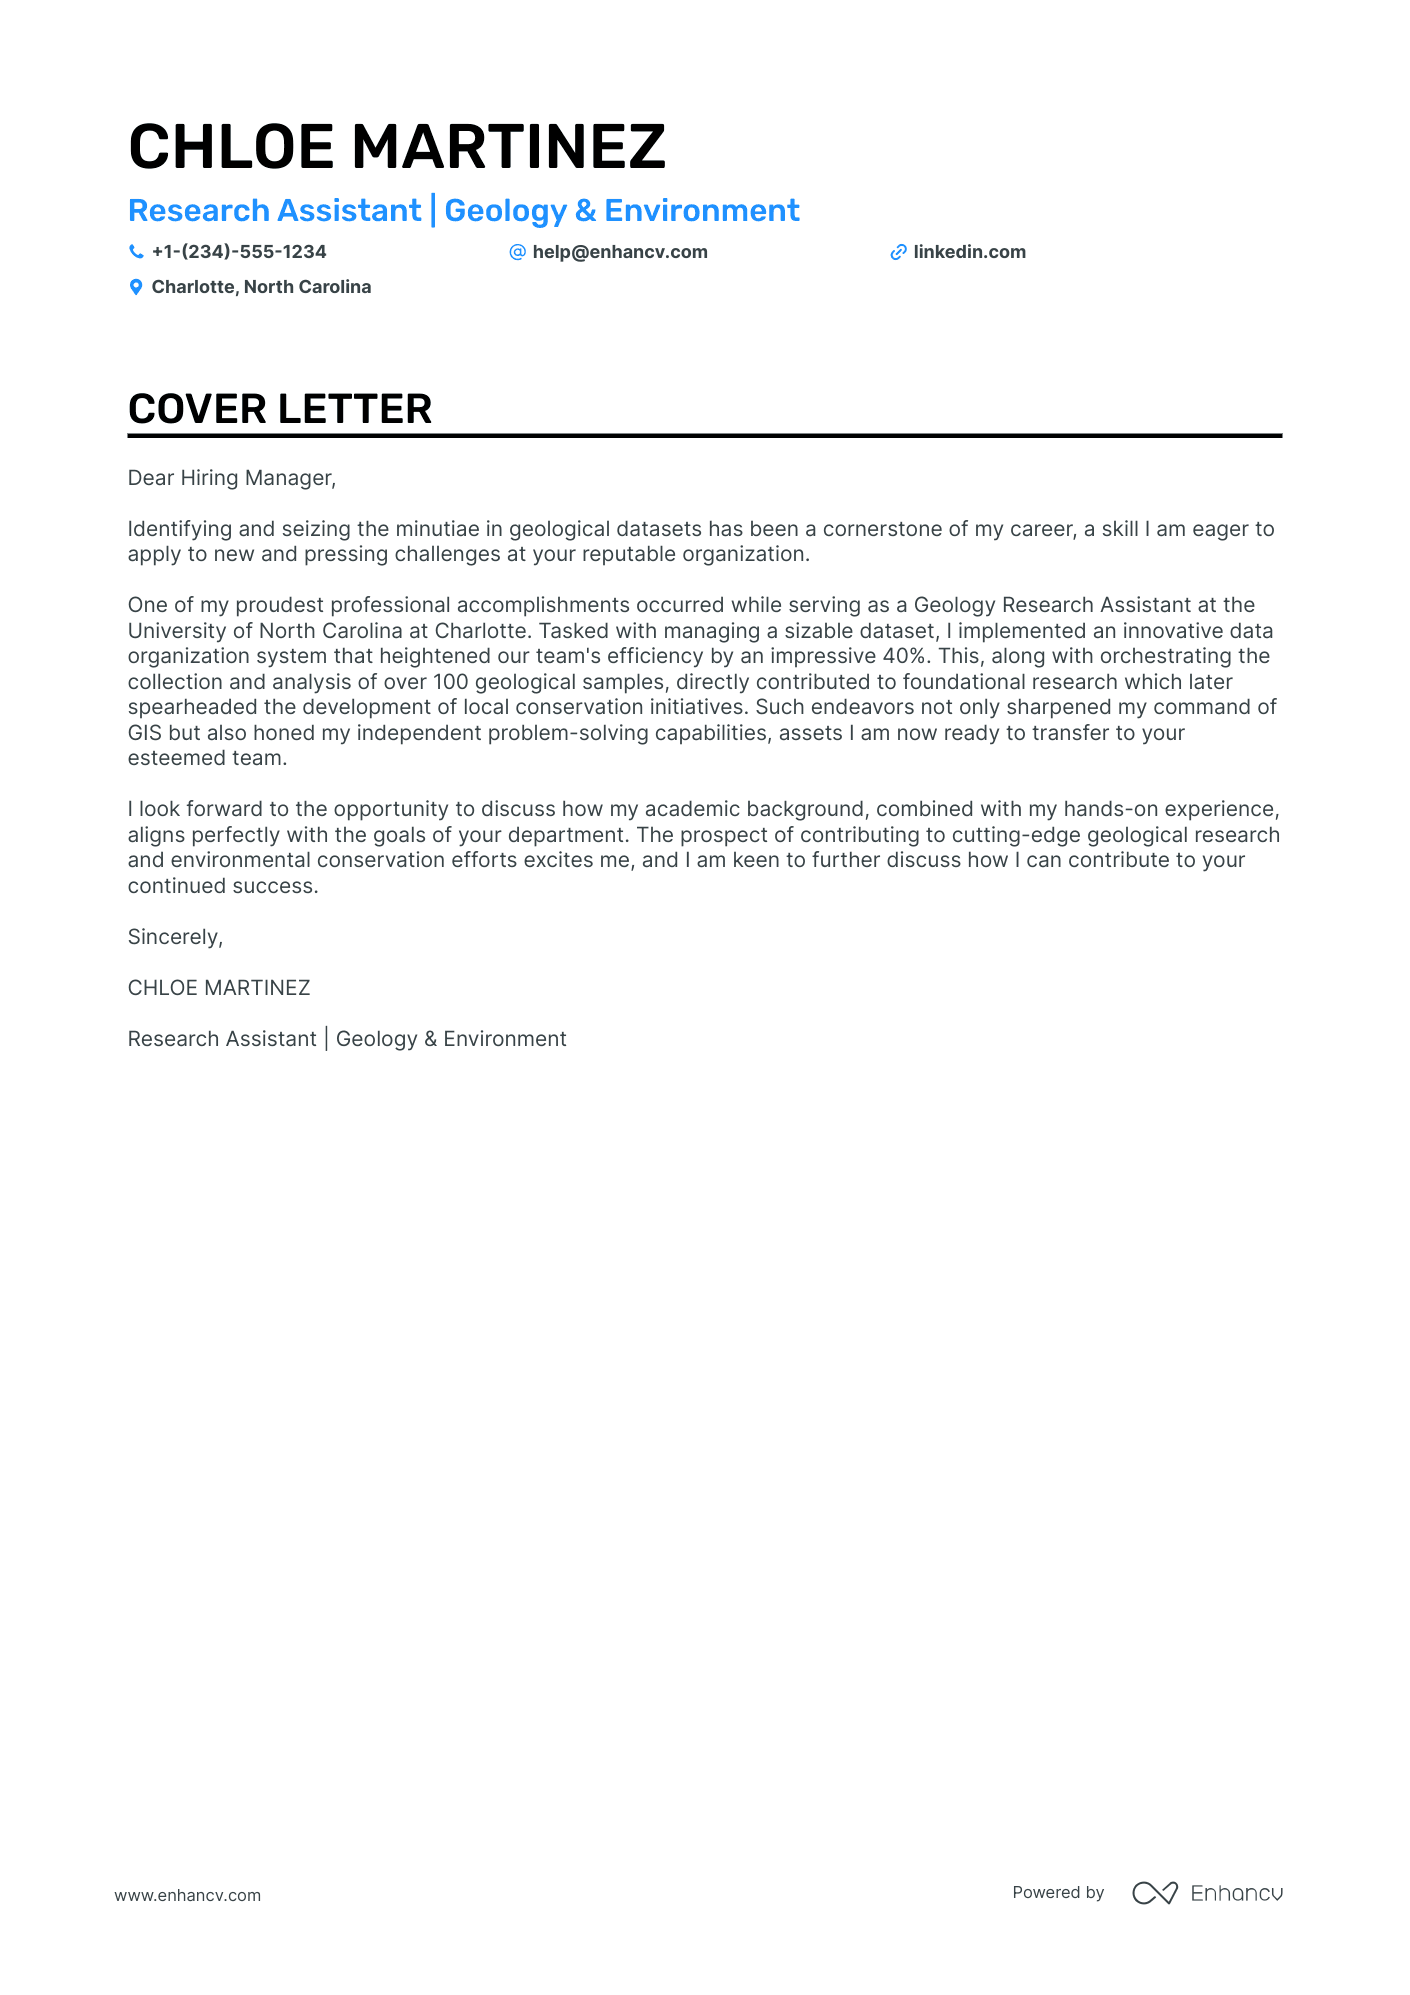 cover letter on research assistant